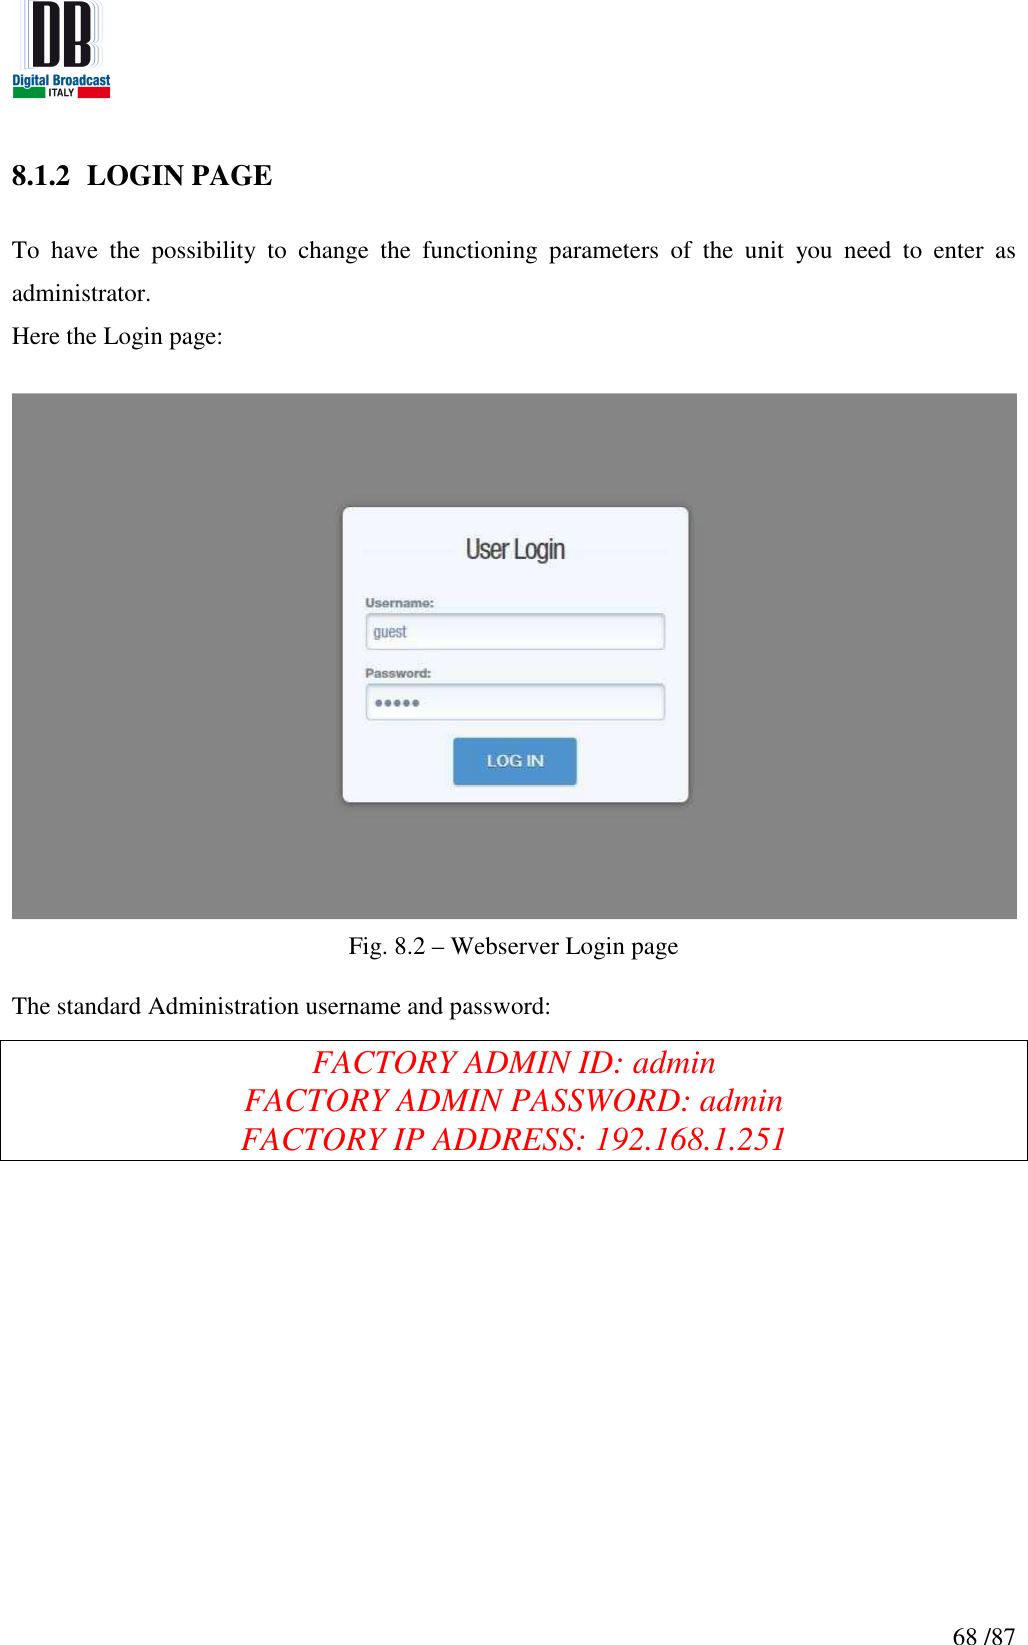   68 /87 8.1.2 LOGIN PAGE  To  have  the  possibility  to  change  the  functioning  parameters  of  the  unit  you  need  to  enter  as administrator.  Here the Login page:   Fig. 8.2 – Webserver Login page  The standard Administration username and password:    FACTORY ADMIN ID: admin FACTORY ADMIN PASSWORD: admin FACTORY IP ADDRESS: 192.168.1.251    